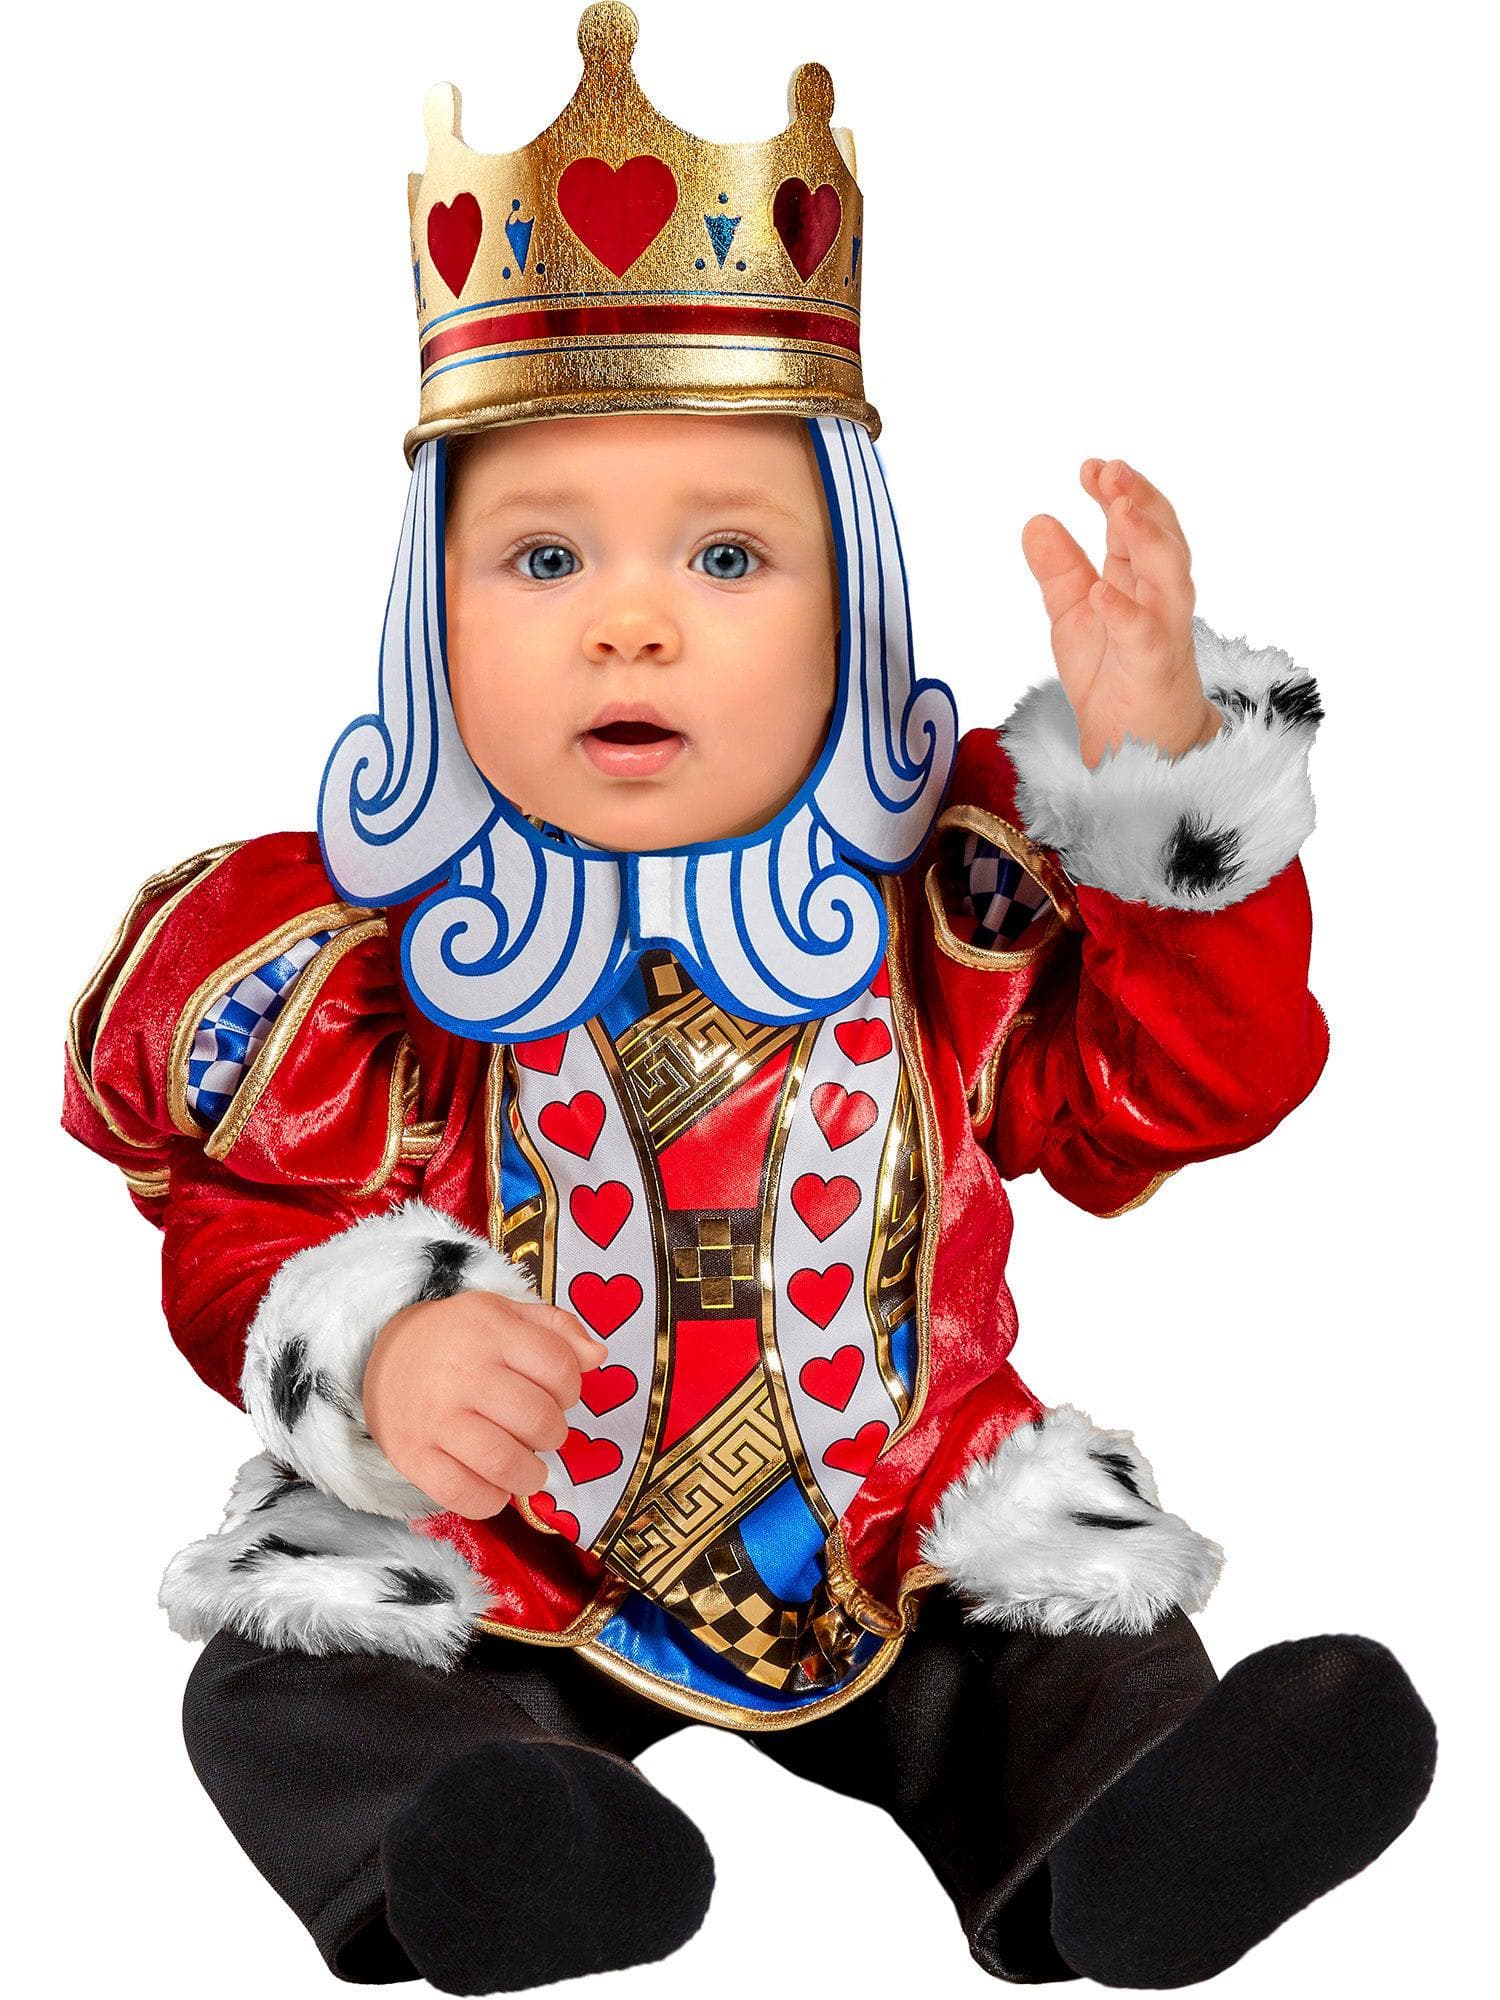 King of Hearts Costume for Babies - costumes.com